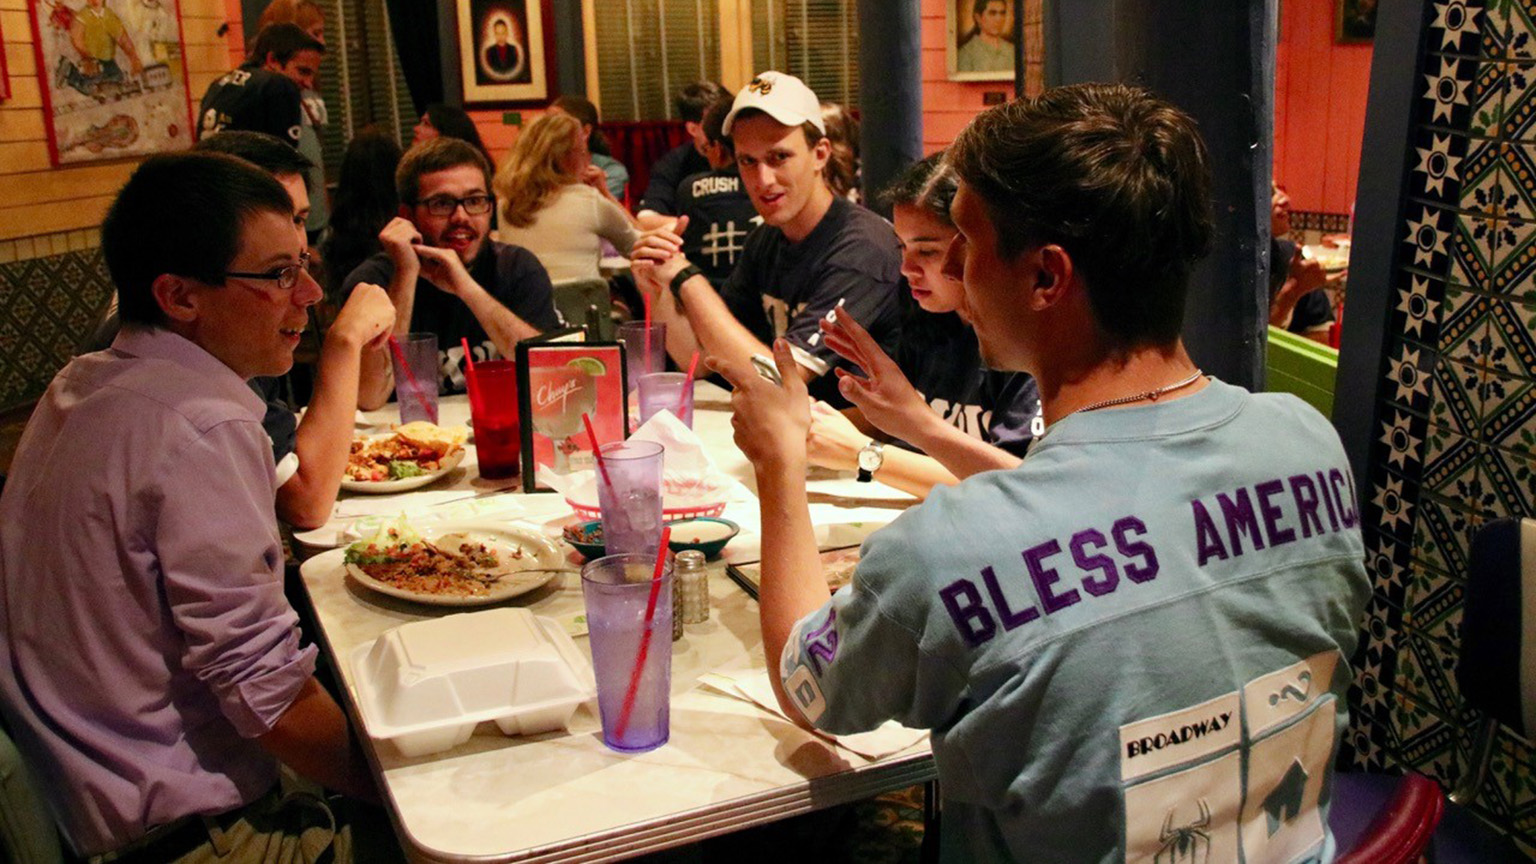 A group of band students eating at a restaurant.